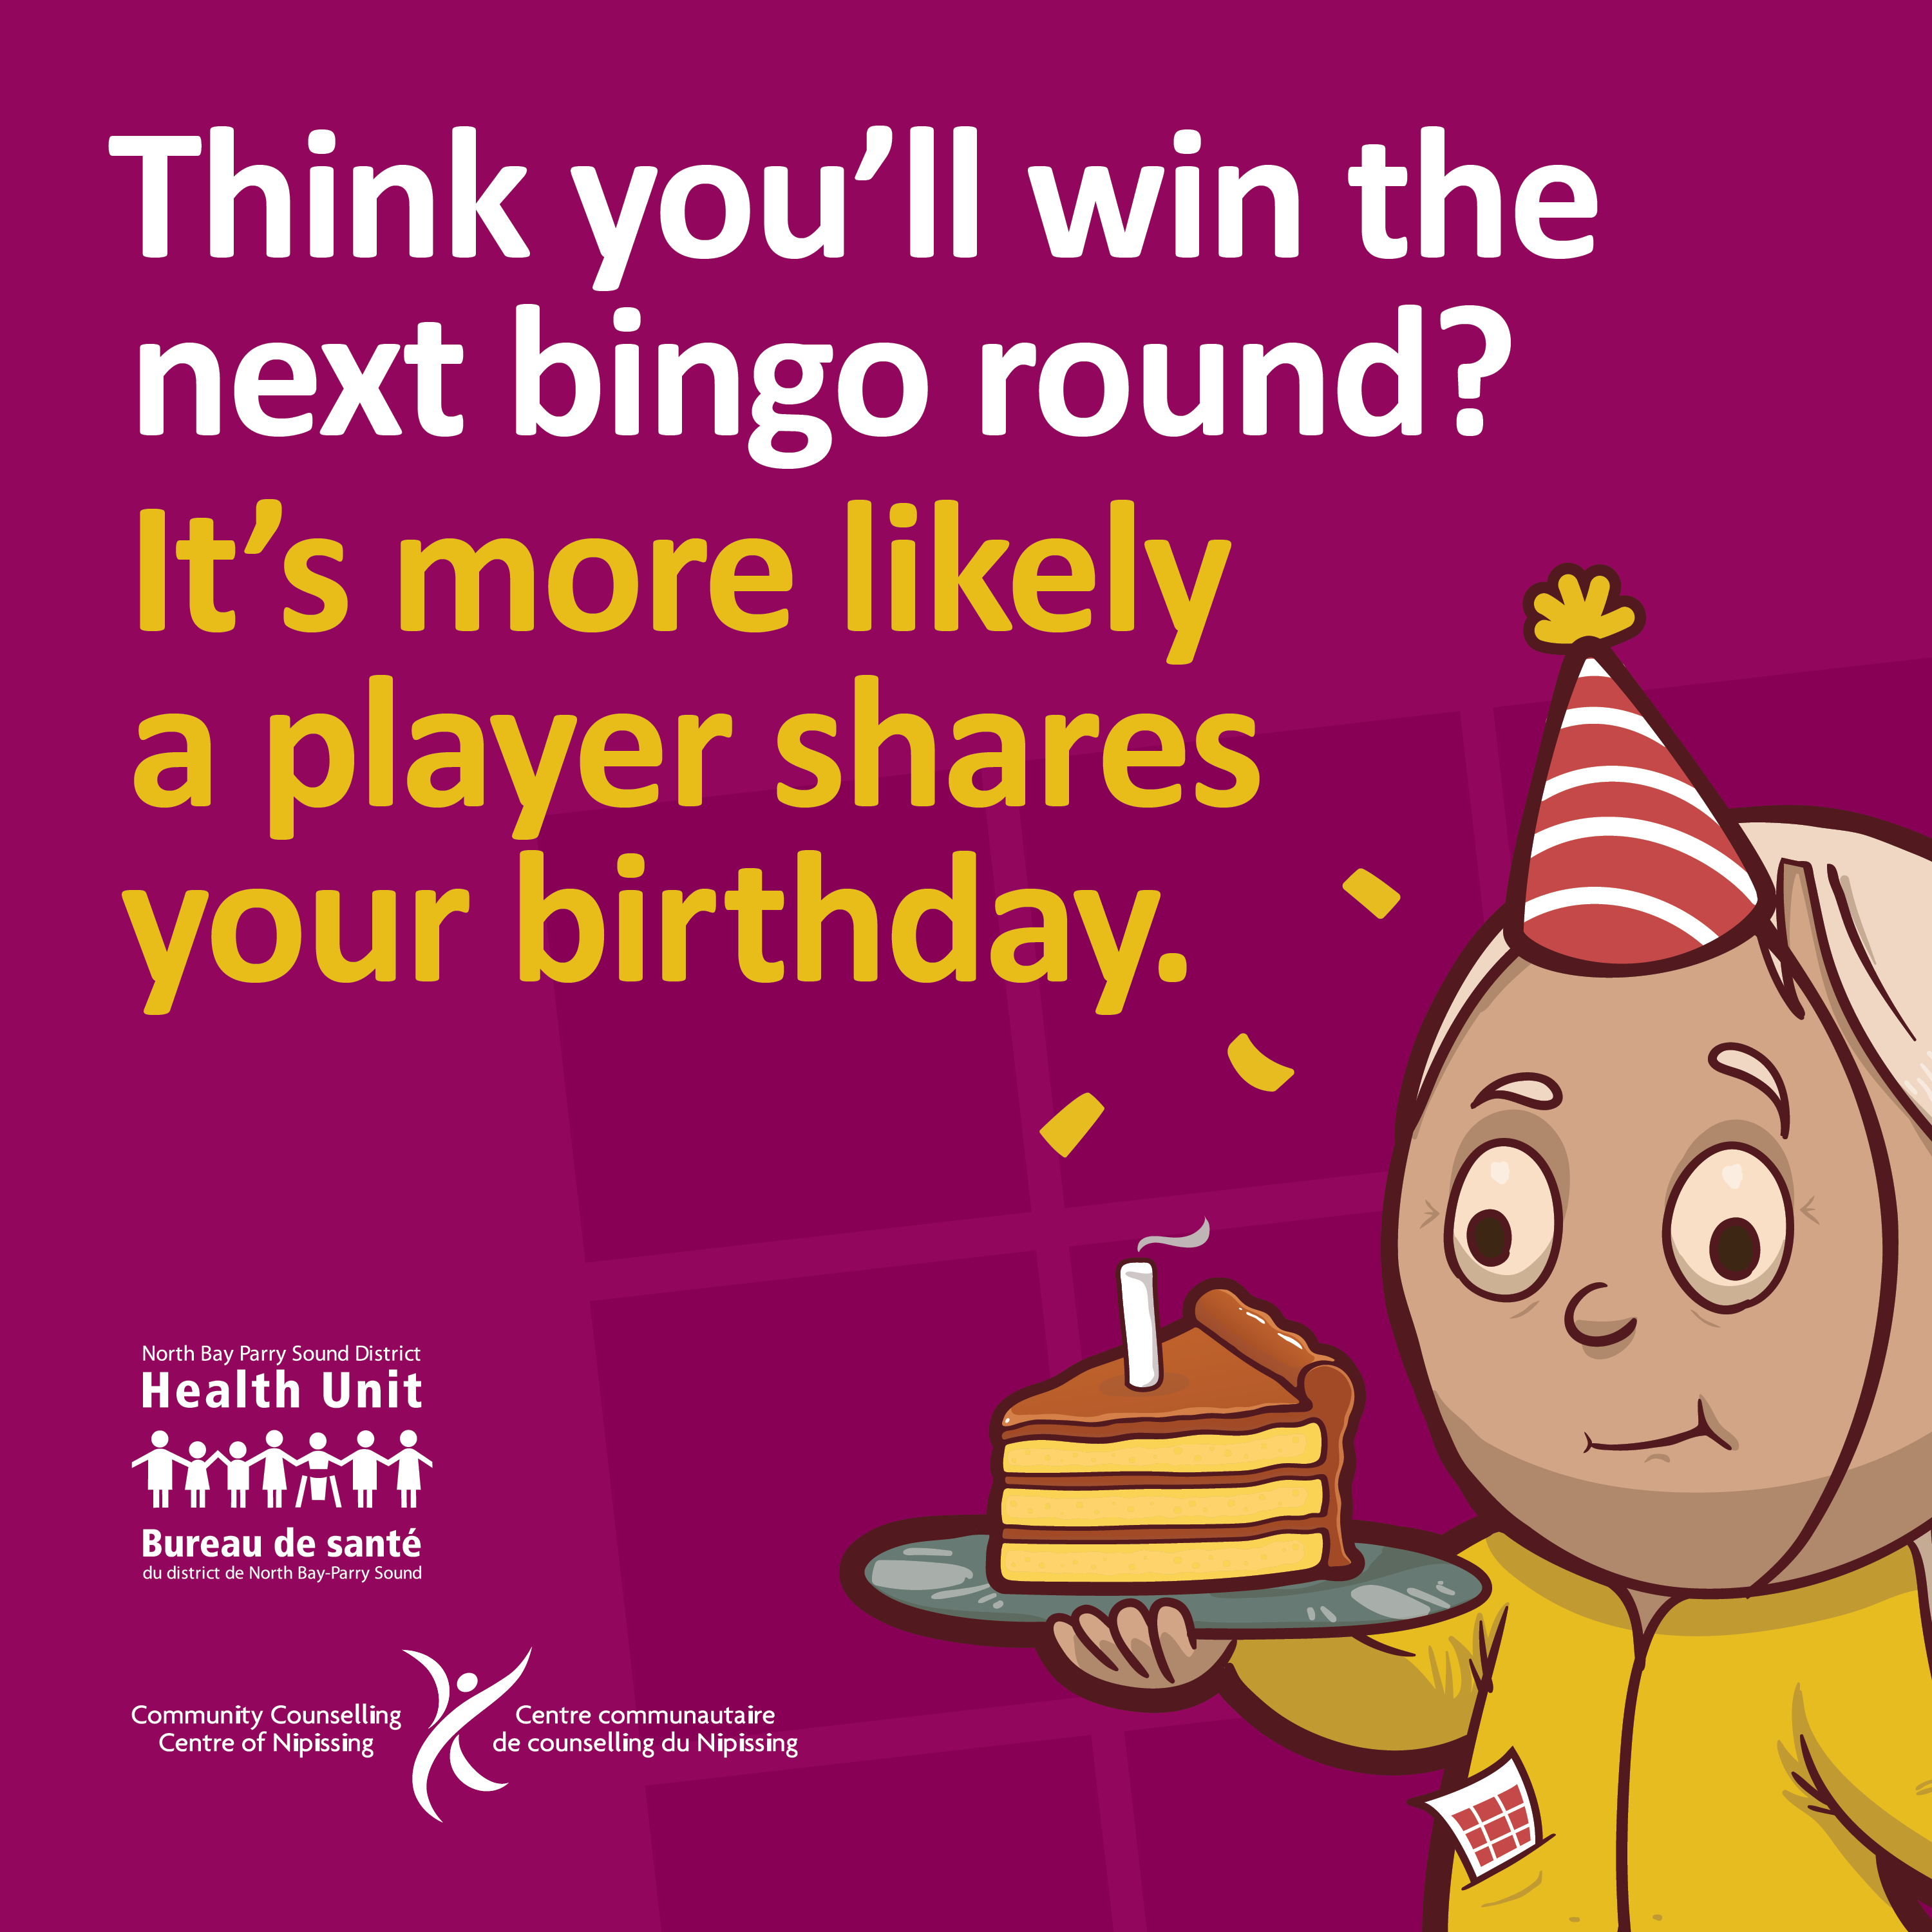 • Think you’ll win the next bingo round? It’s more likely a player shares your birthday. 